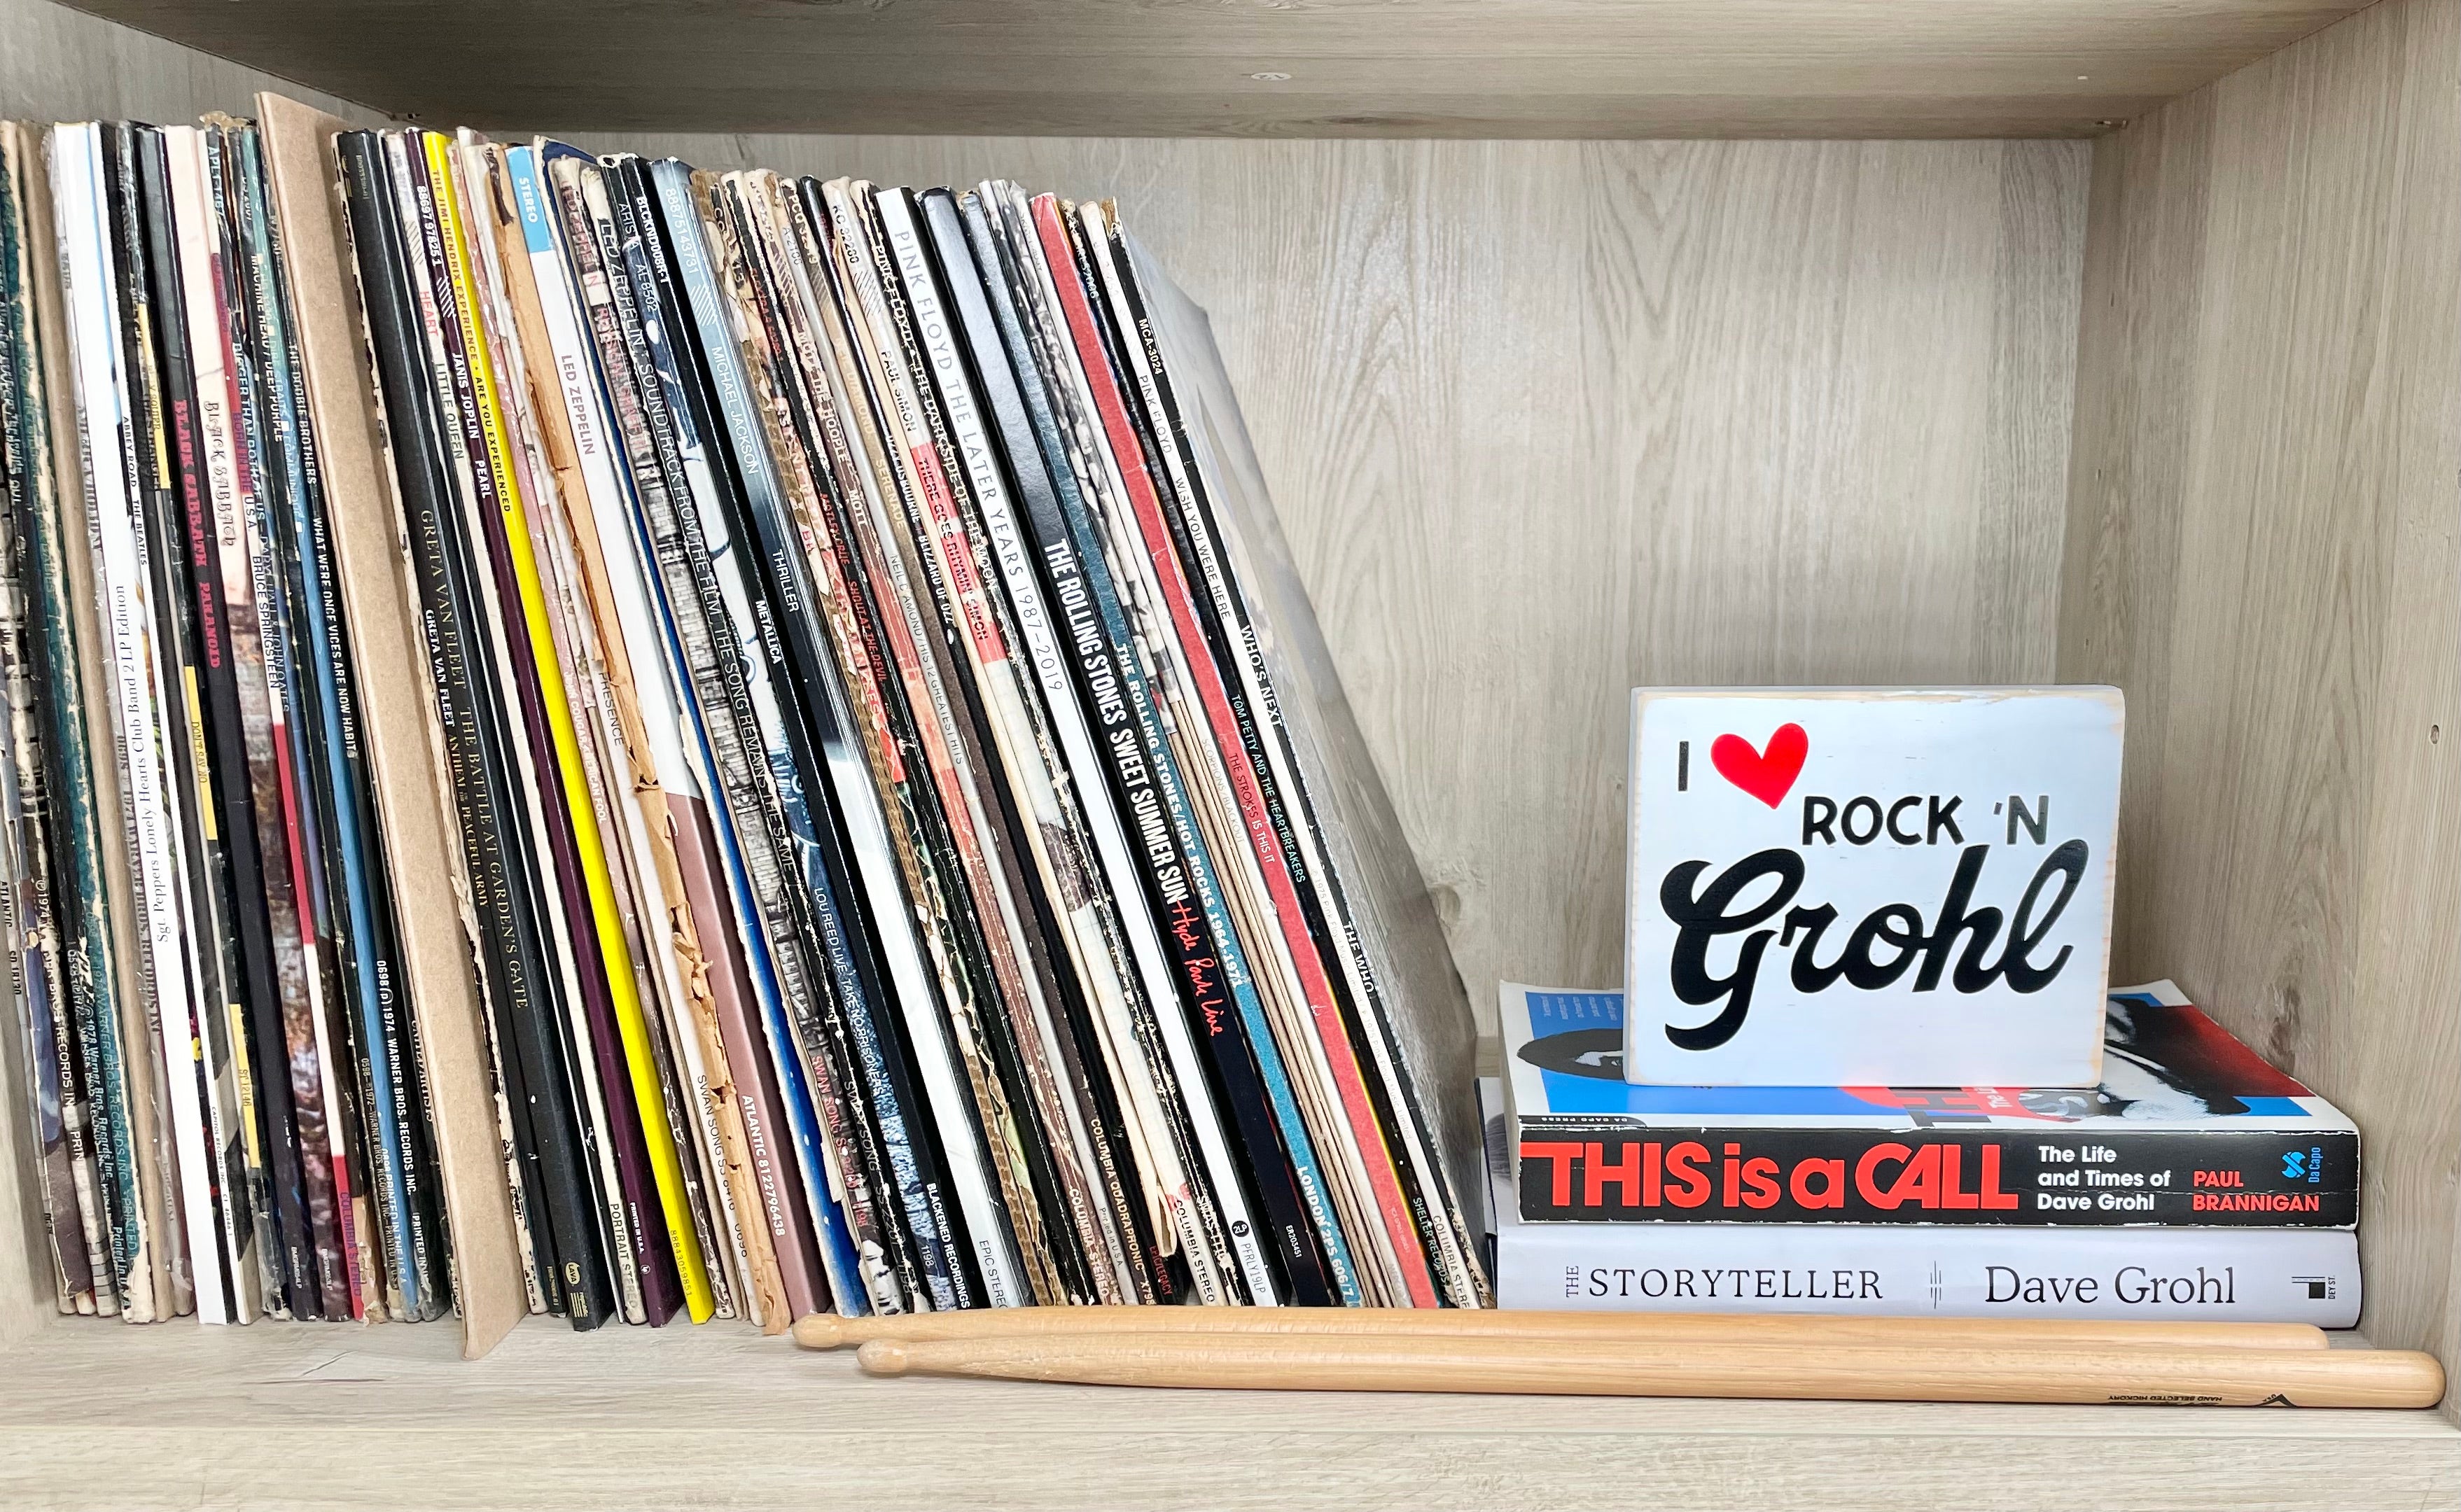 I Love Rock 'n Grohl Sign | Dave Grohl | Three Sister Studio